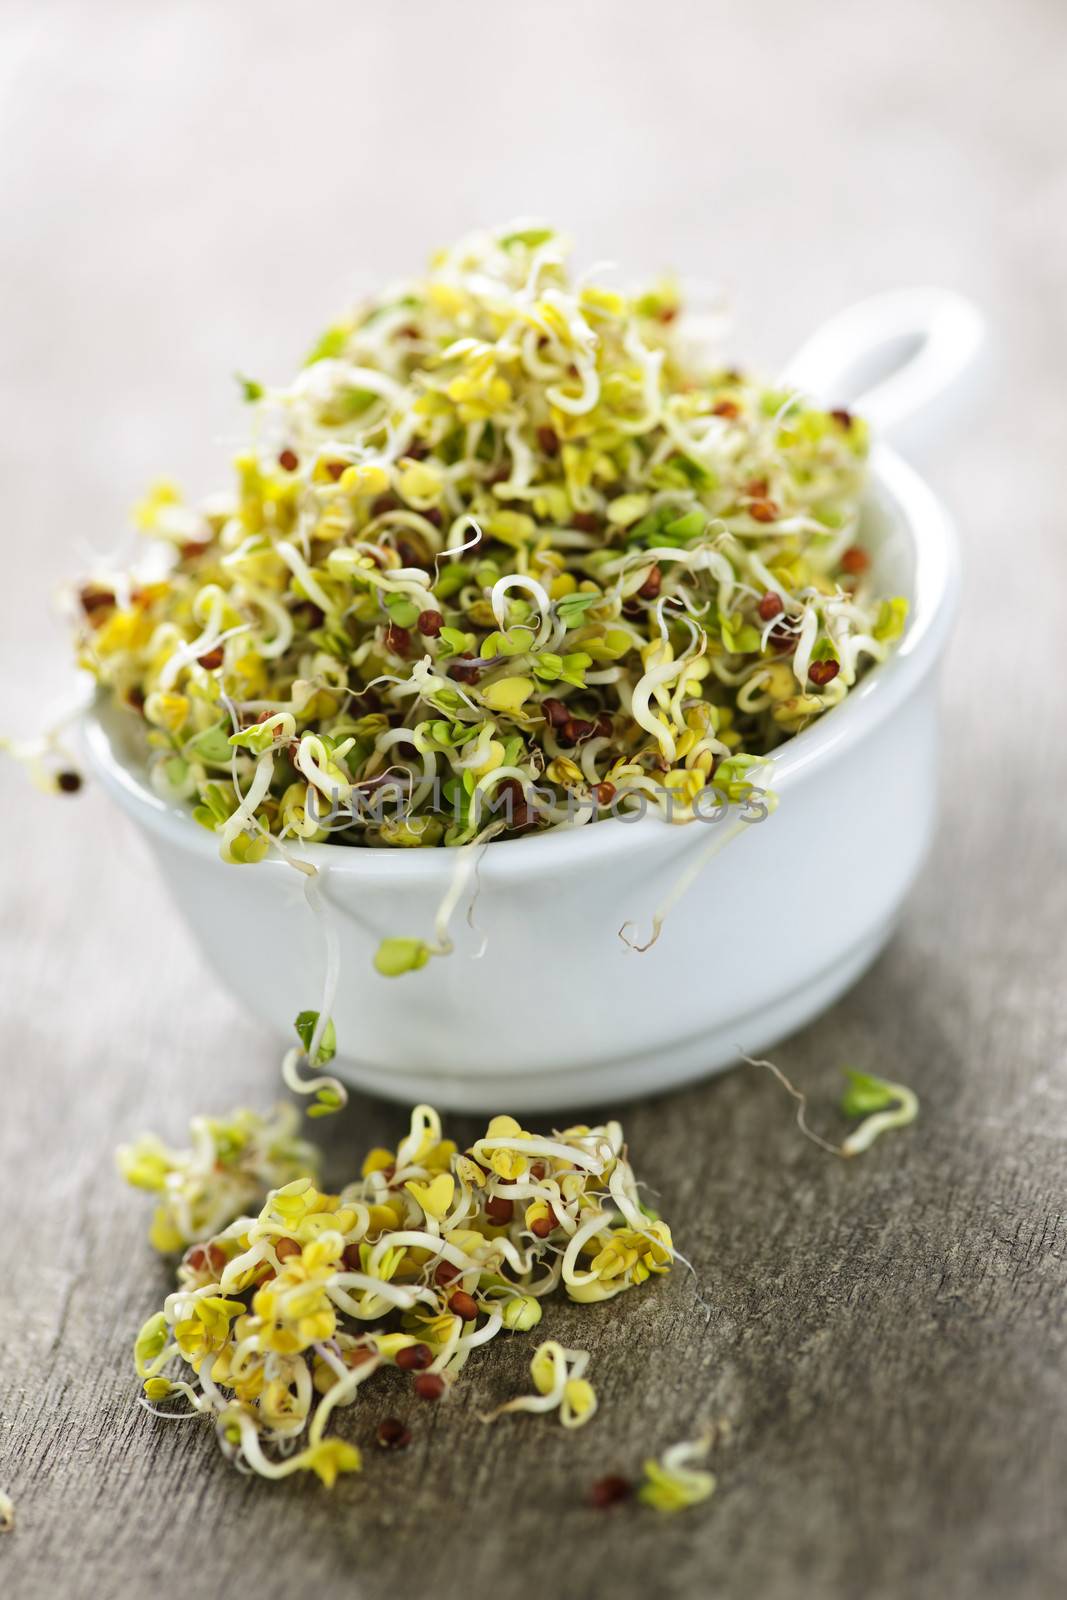 Organic young alfalfa sprouts in a cup